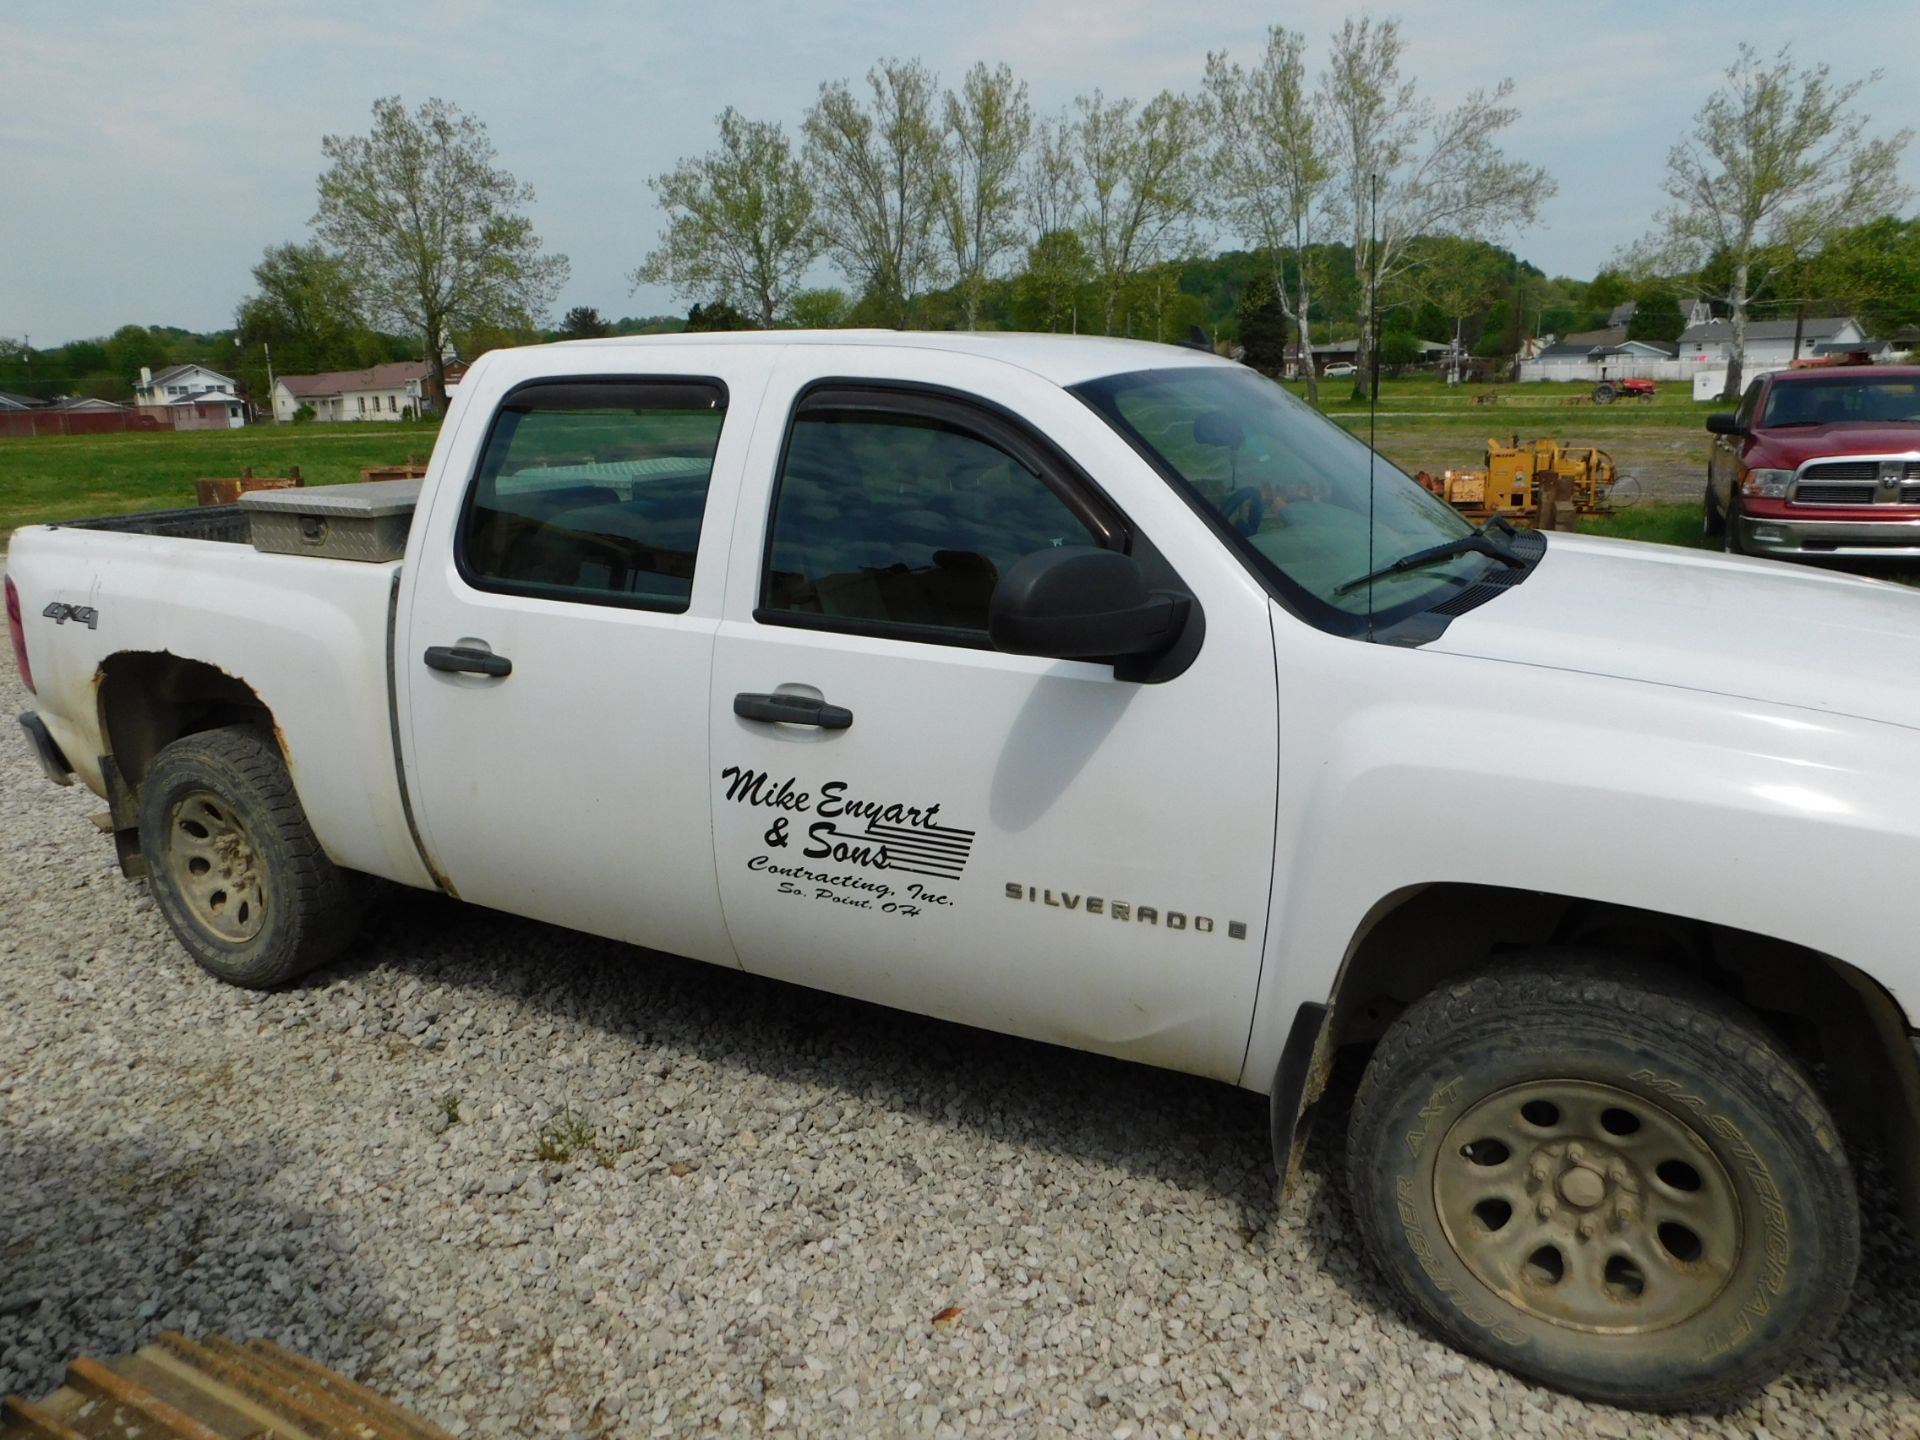 2007 Chevy Silverado 4 dr. pick-up truck, Auto Trans. , Air, am/fm, 4 Wheel Drive, 297,470 miles - Image 4 of 31